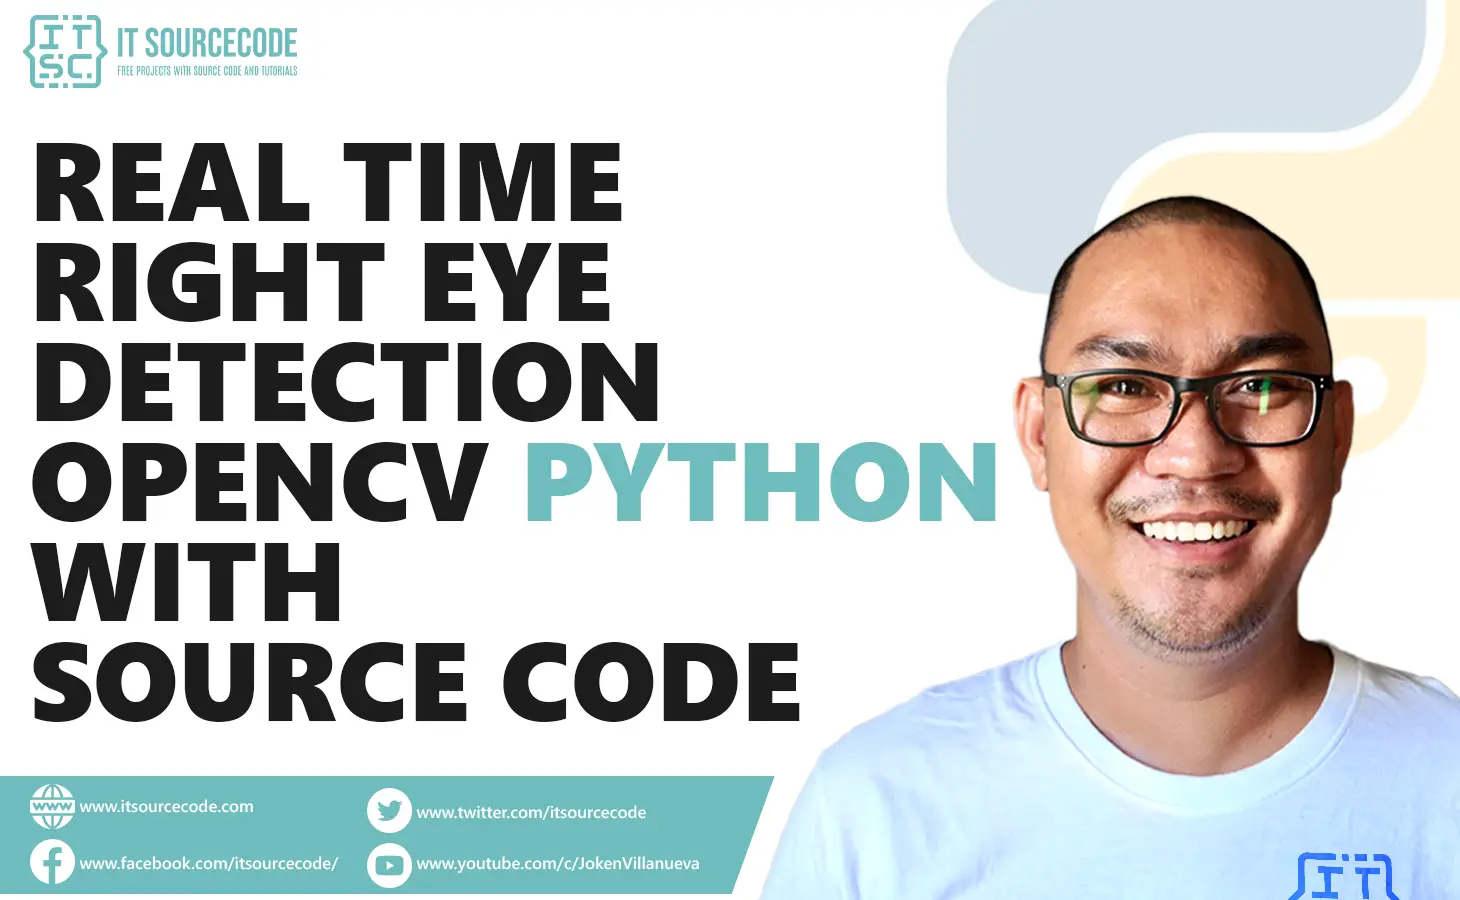 Real-Time Right Eye Detection OpenCV Python With Source Code